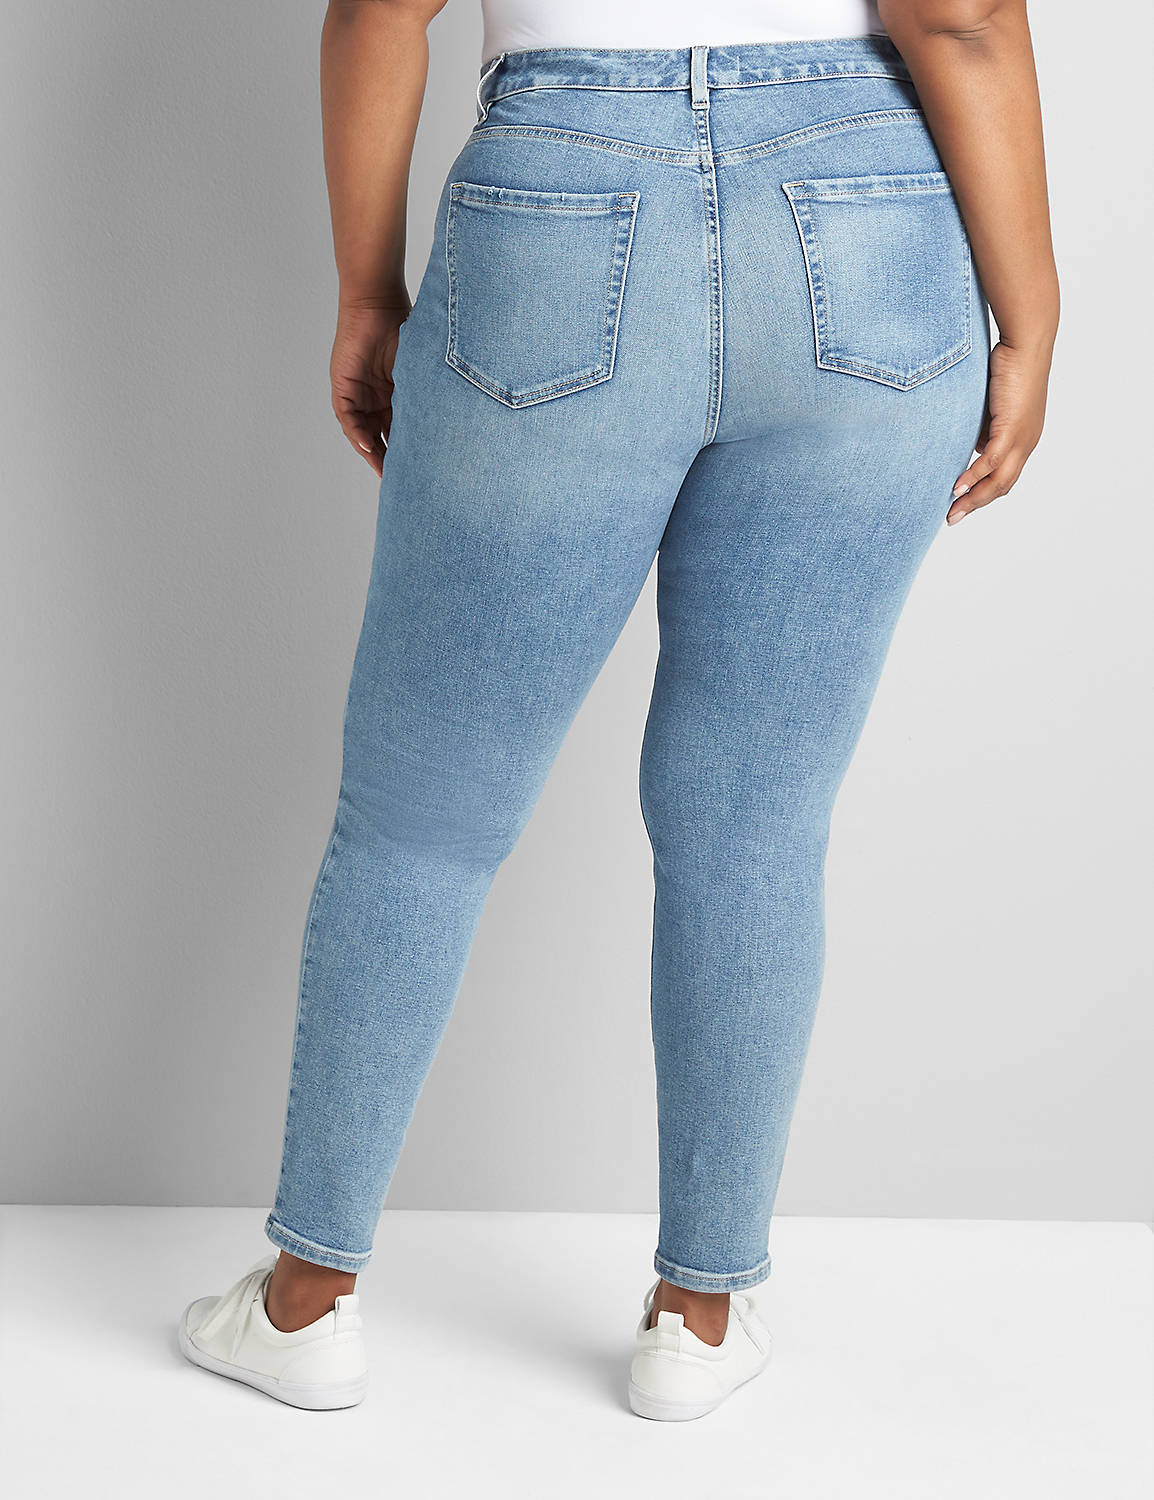 Curvy Fit High-Rise Skinny Jean- Light Wash Product Image 2